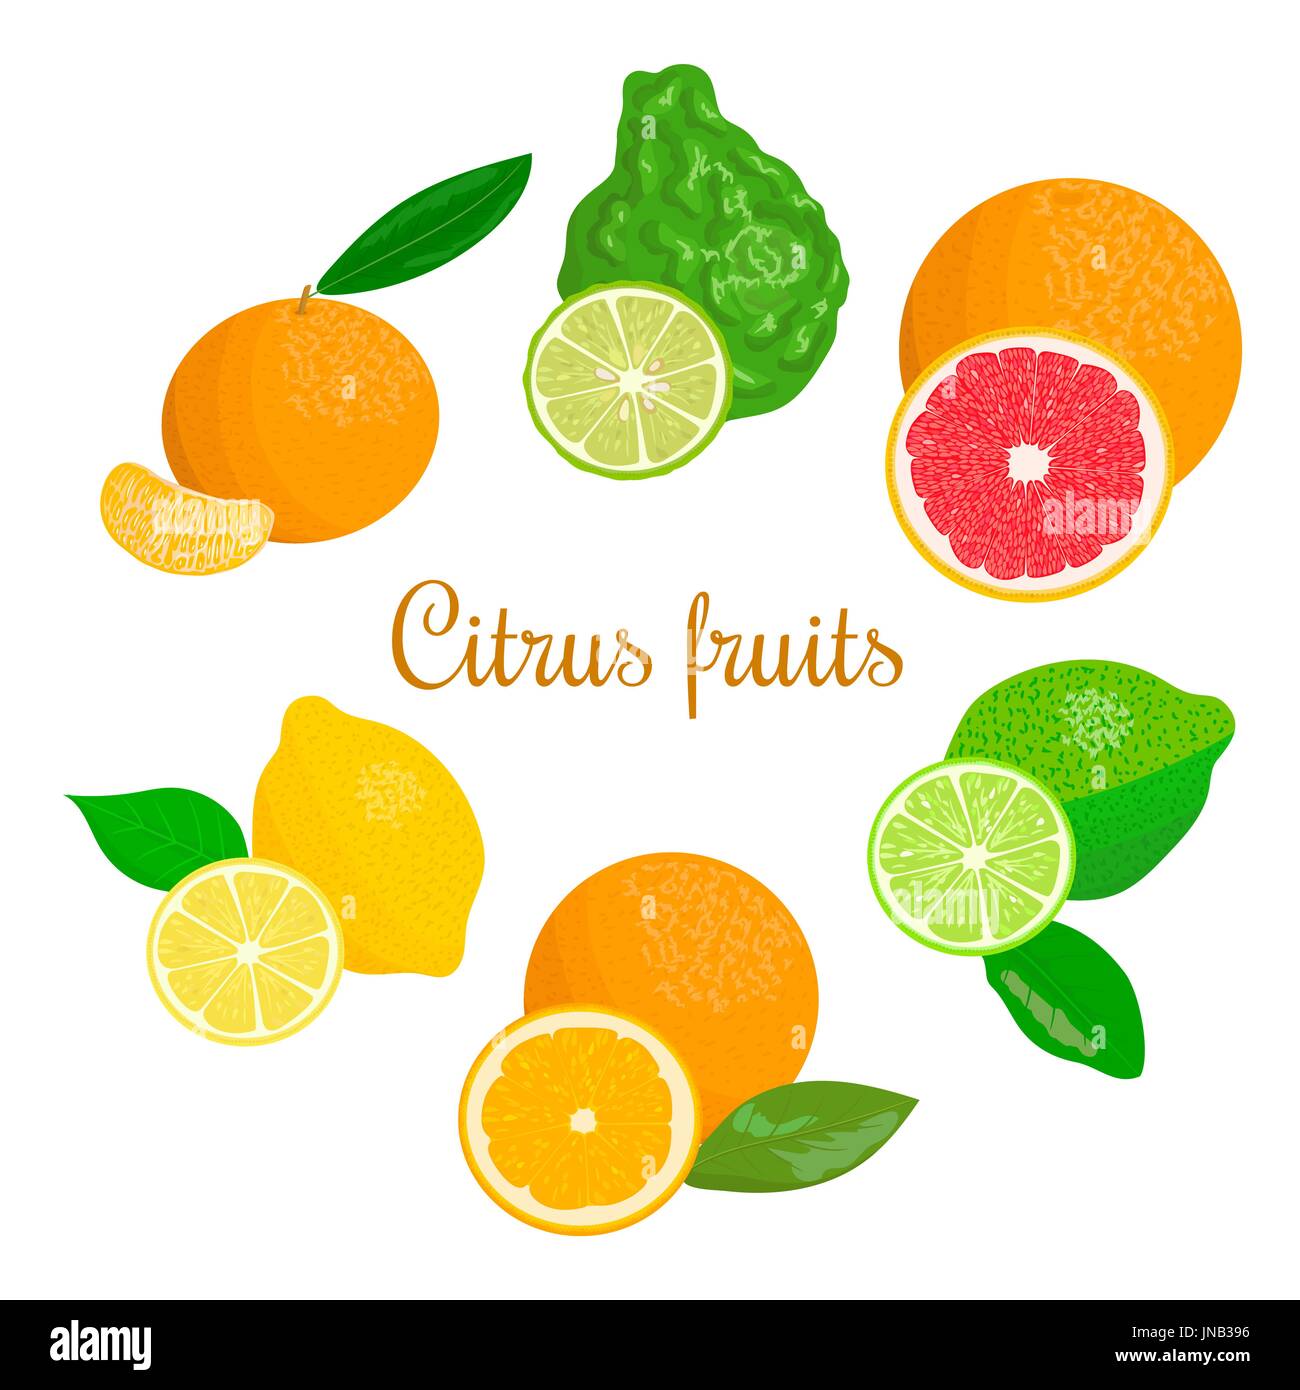 Collection of citrus products - orange, lemon, lime, bergamot, tangerine, grapefruit with leaves. Vector set of whole fruits and slices. for design, p Stock Vector